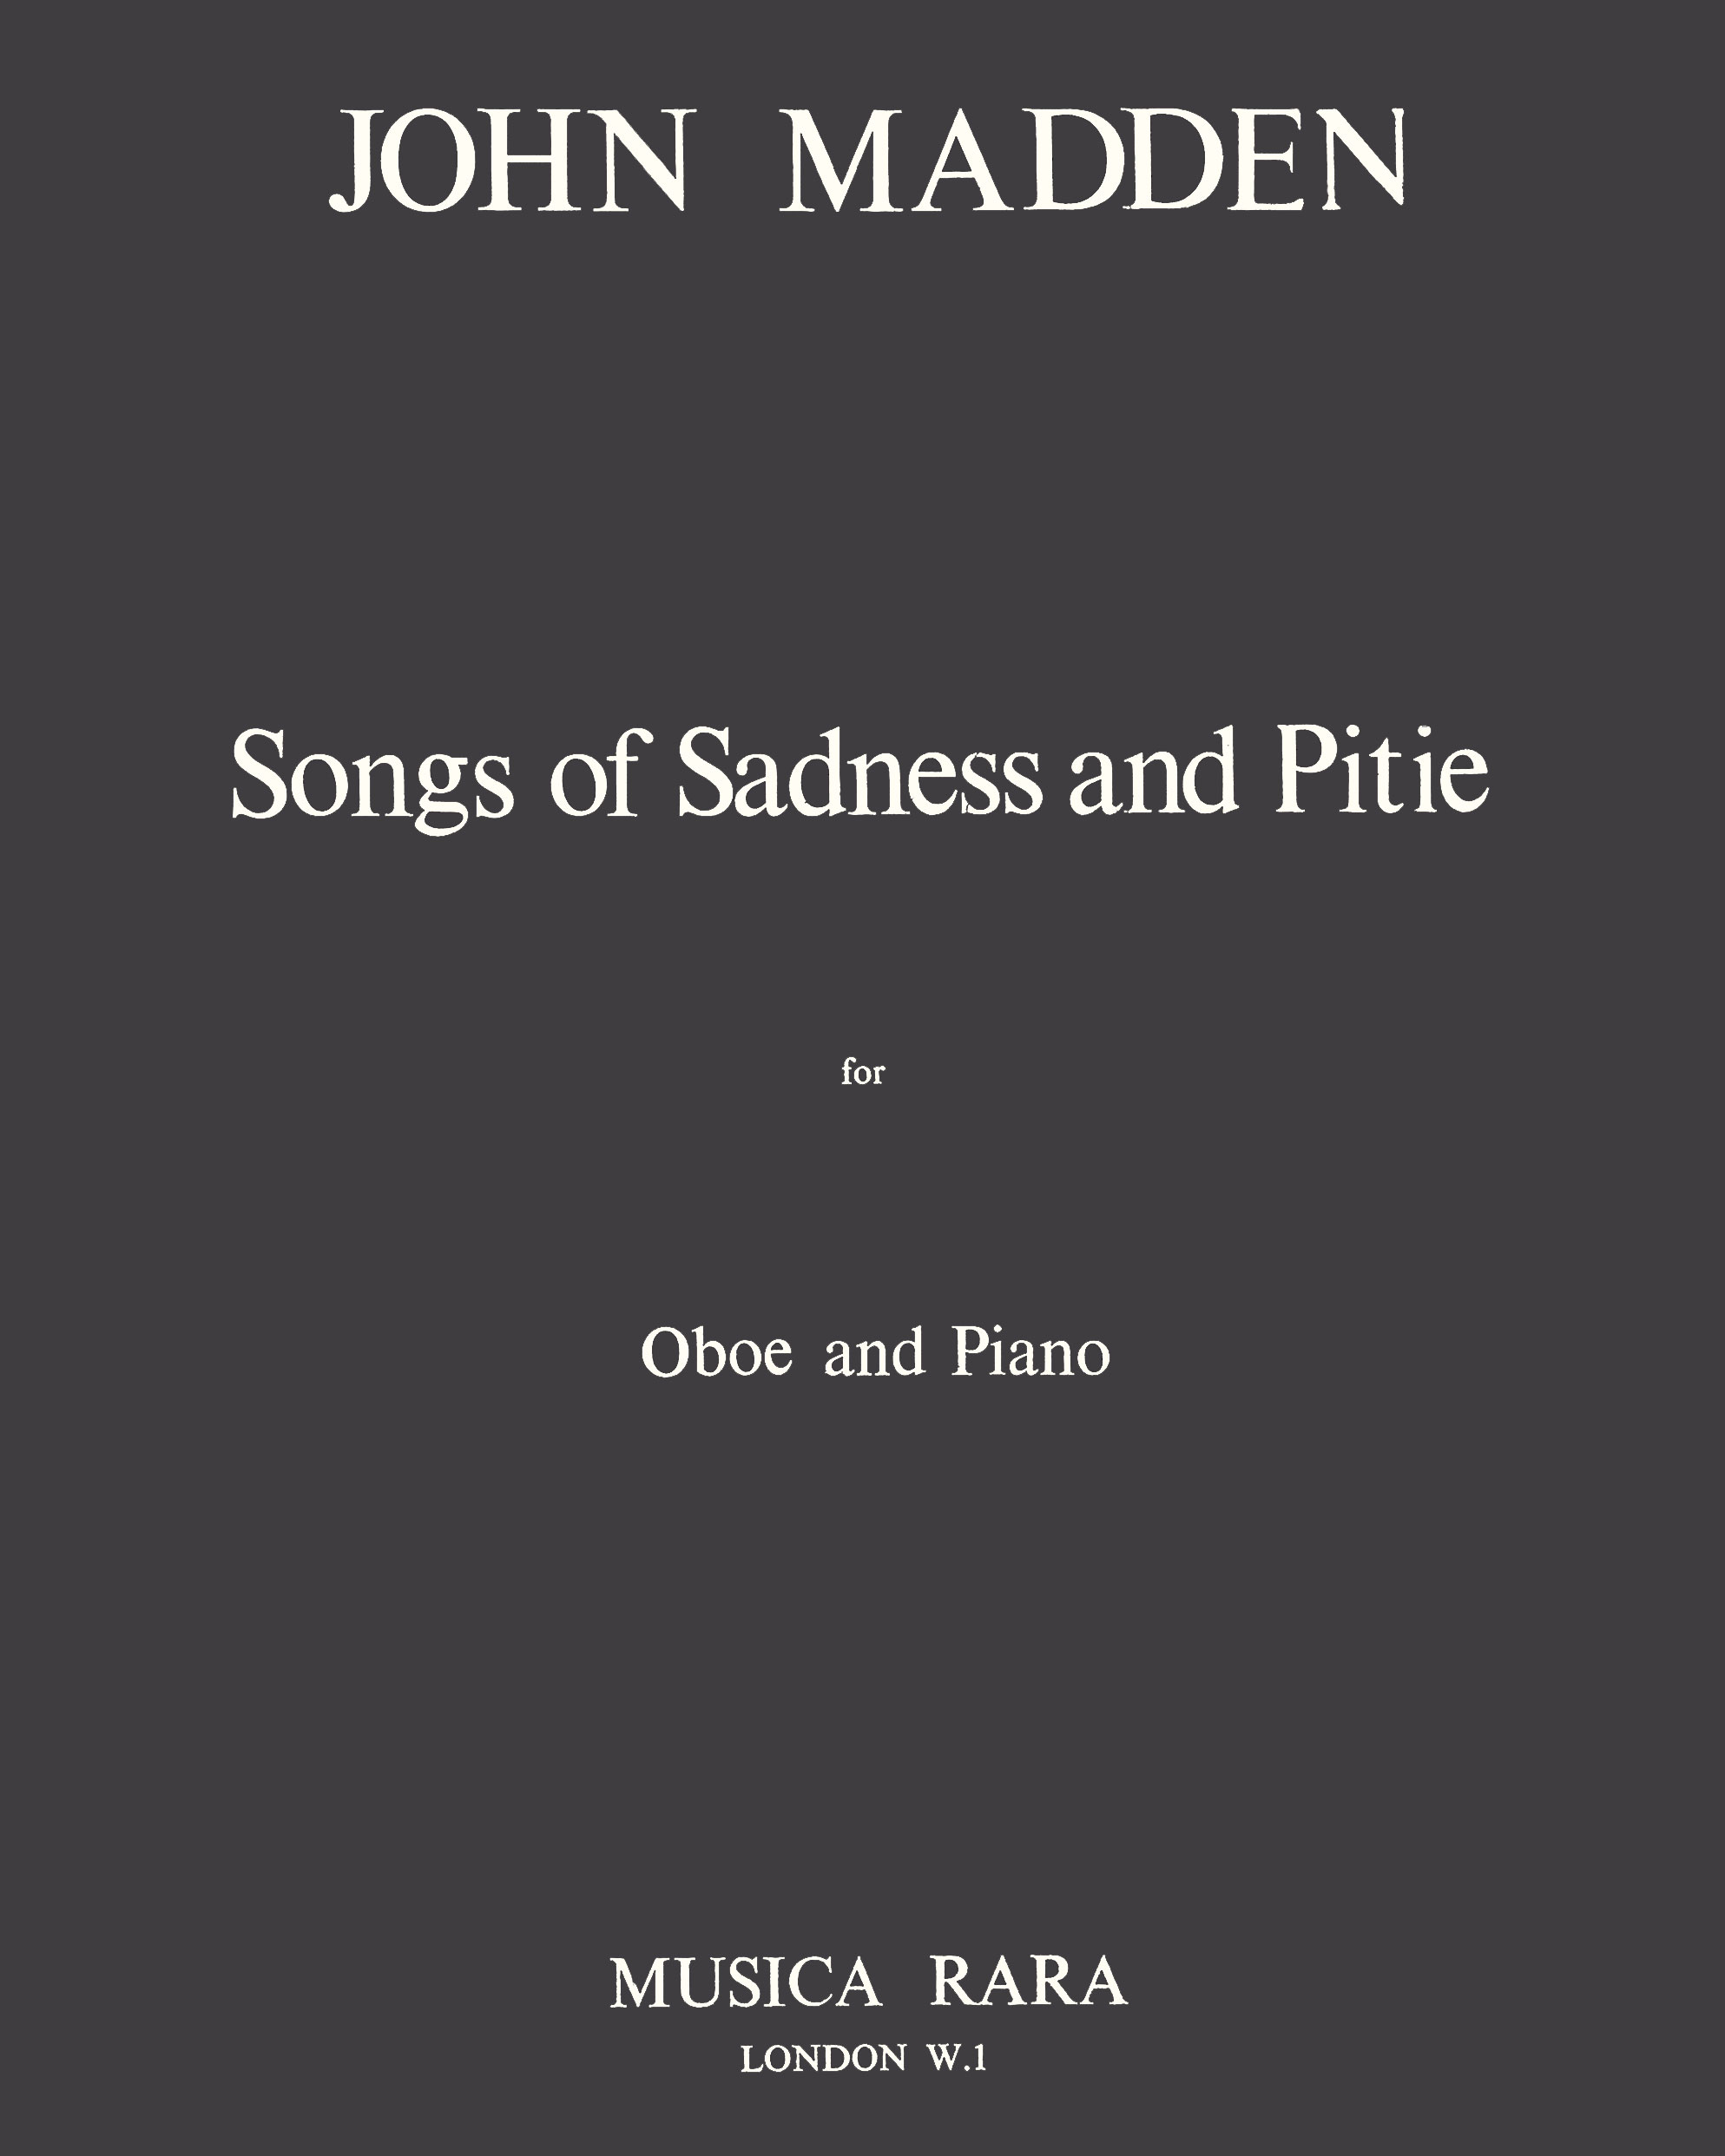 Songs of Sadness and Pitie